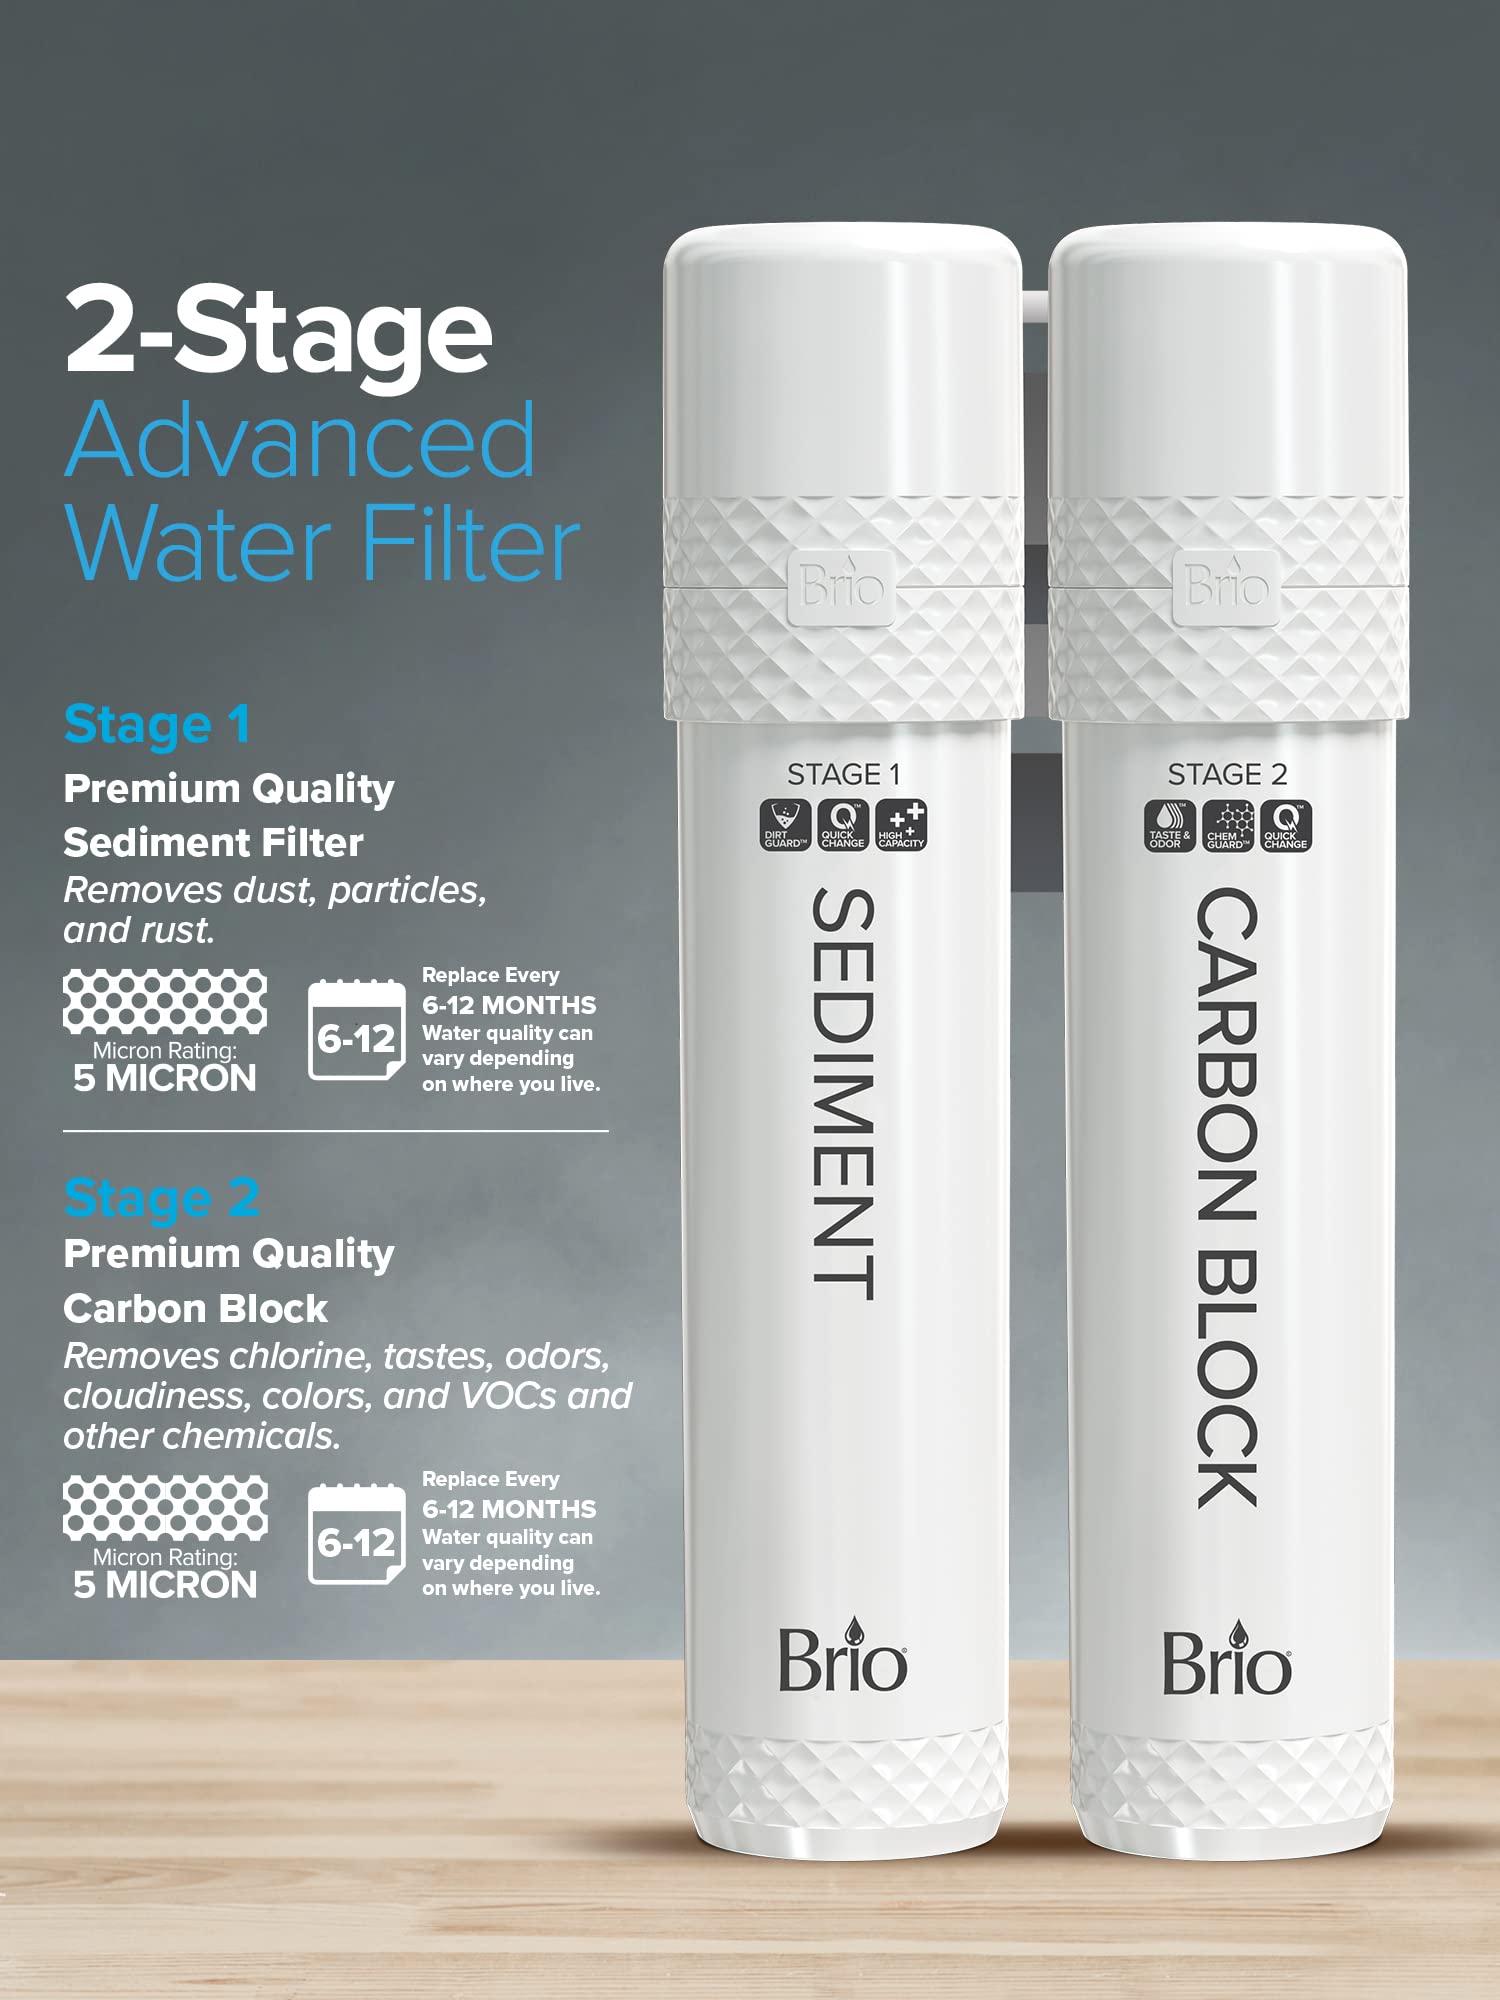 Brio 2 Stage Water Cooler Filter Replacement Kit - for Models with "UVF2" - 1500 Gallons